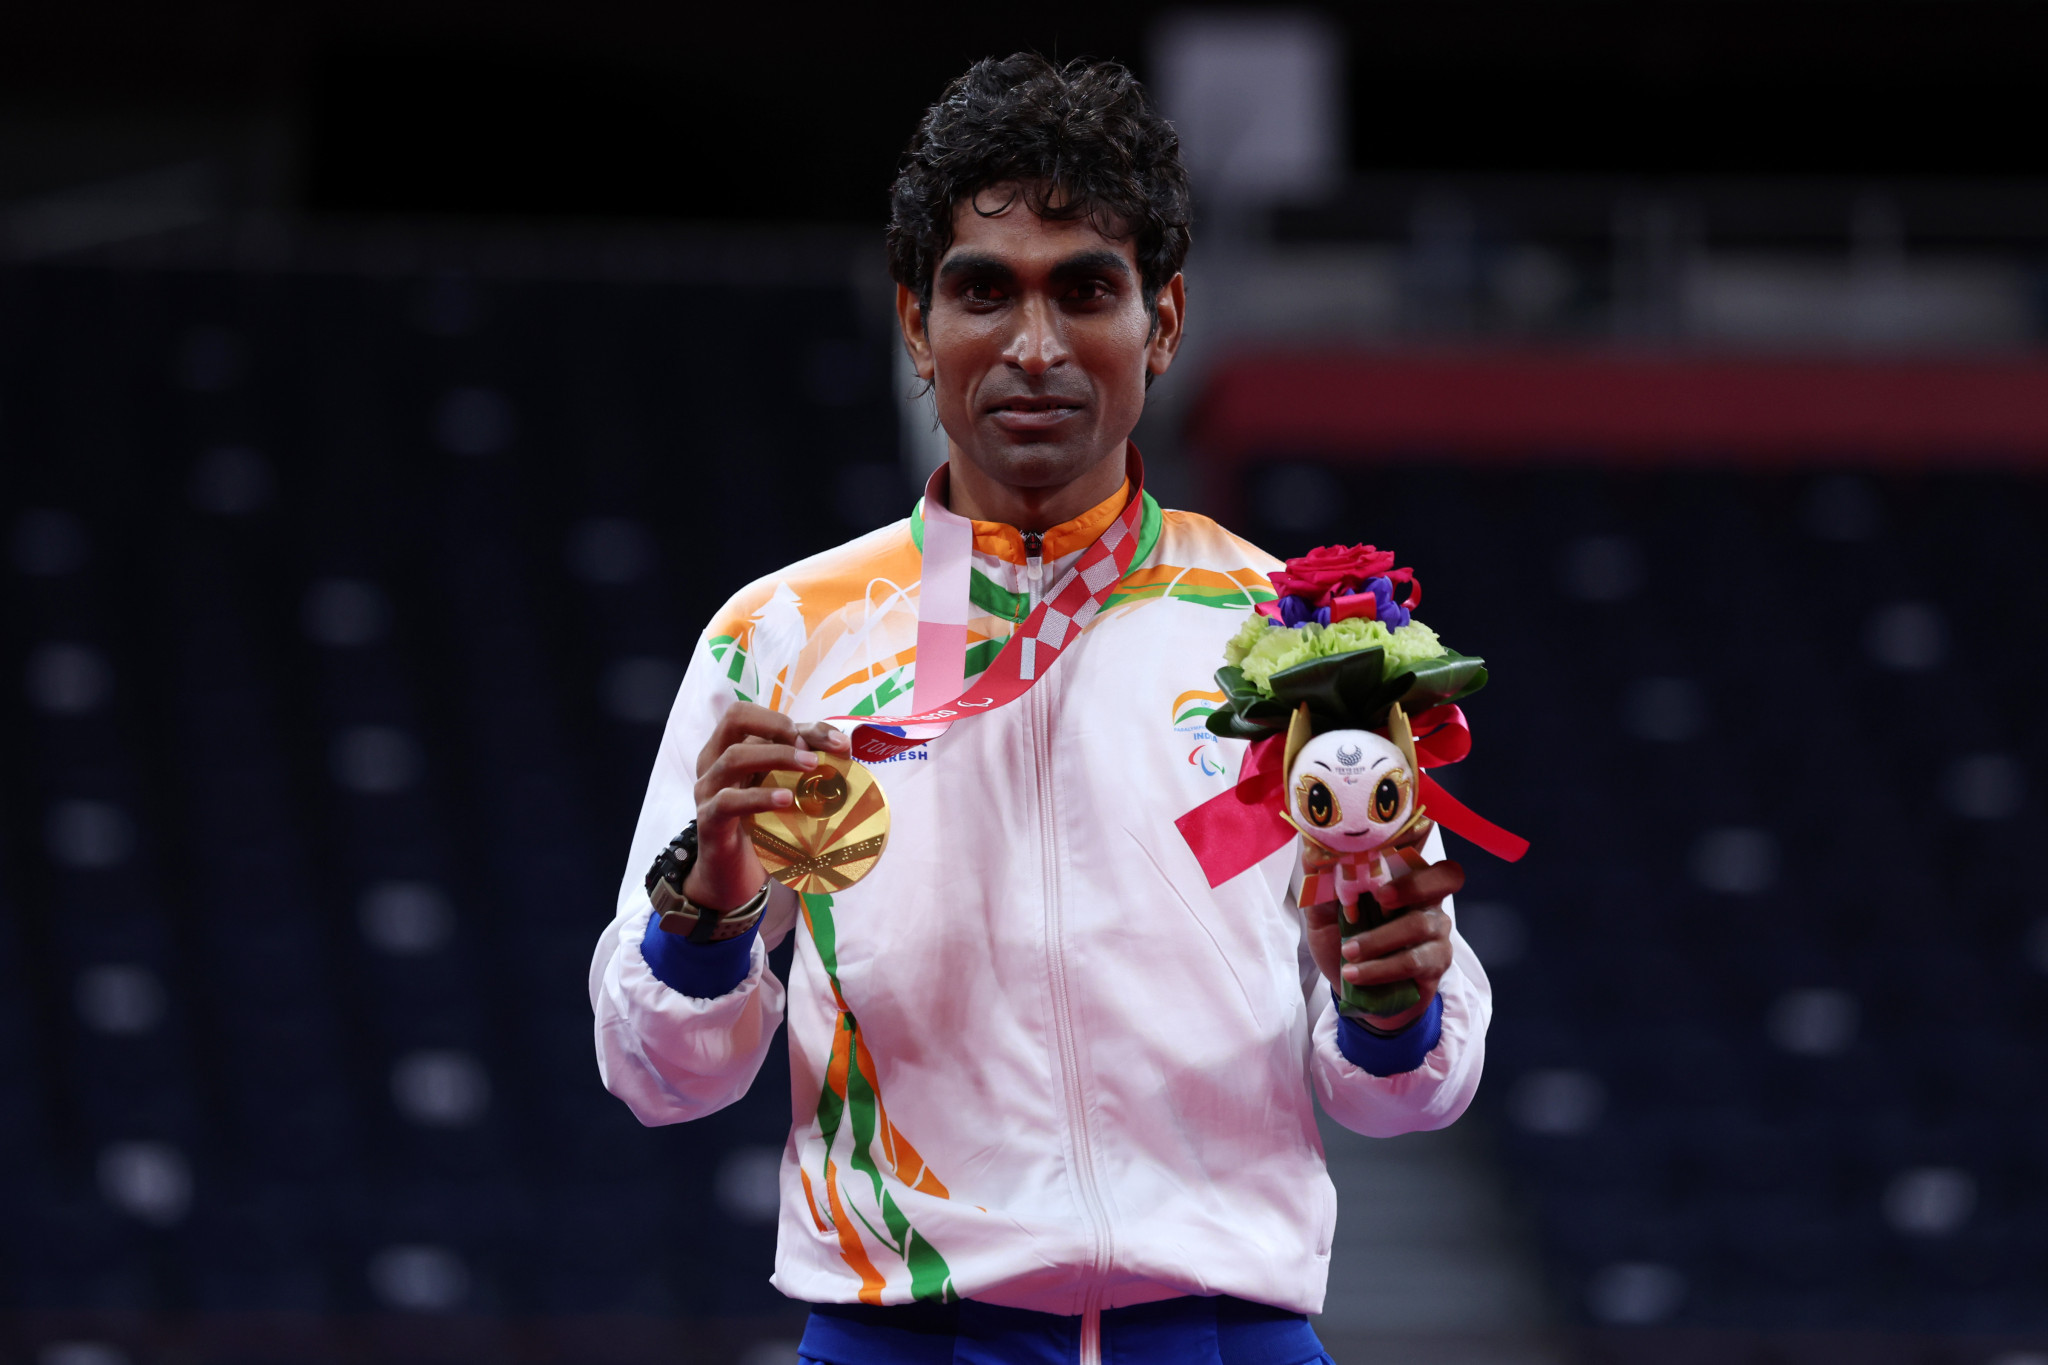 Pramod Bhagat was one of two Indian winners in badminton at the Paralympics ©Getty Images